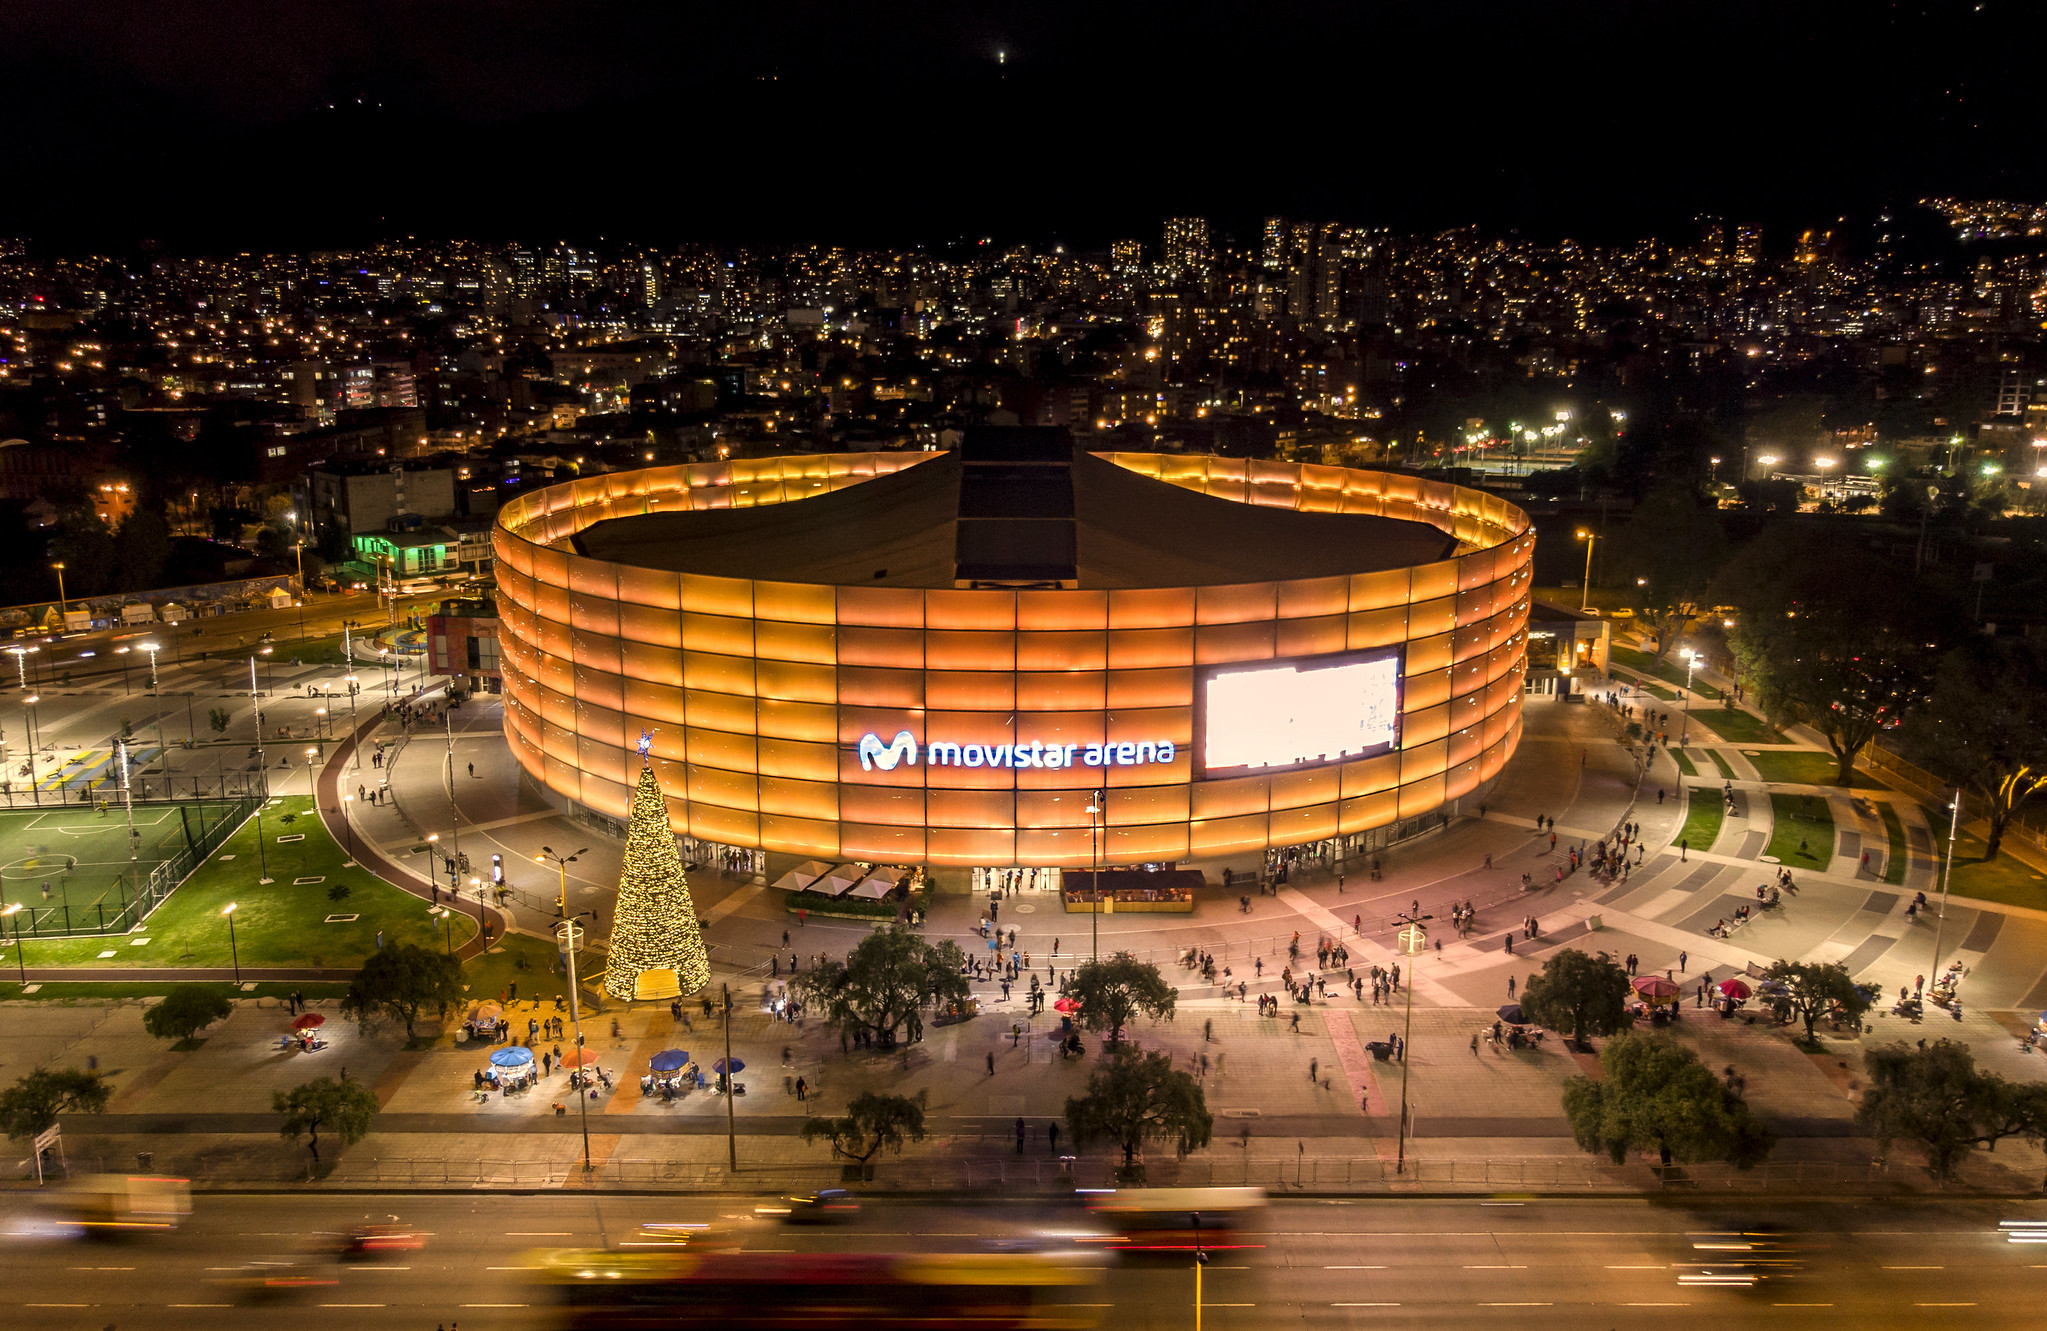 Movistar Arena, the most important and modern indoor event arena in Bogotá, lighted up in orange to commemorate the International Day for the Elimination of Violence against Women. Photo: UN Women/Juan Camilo Arias